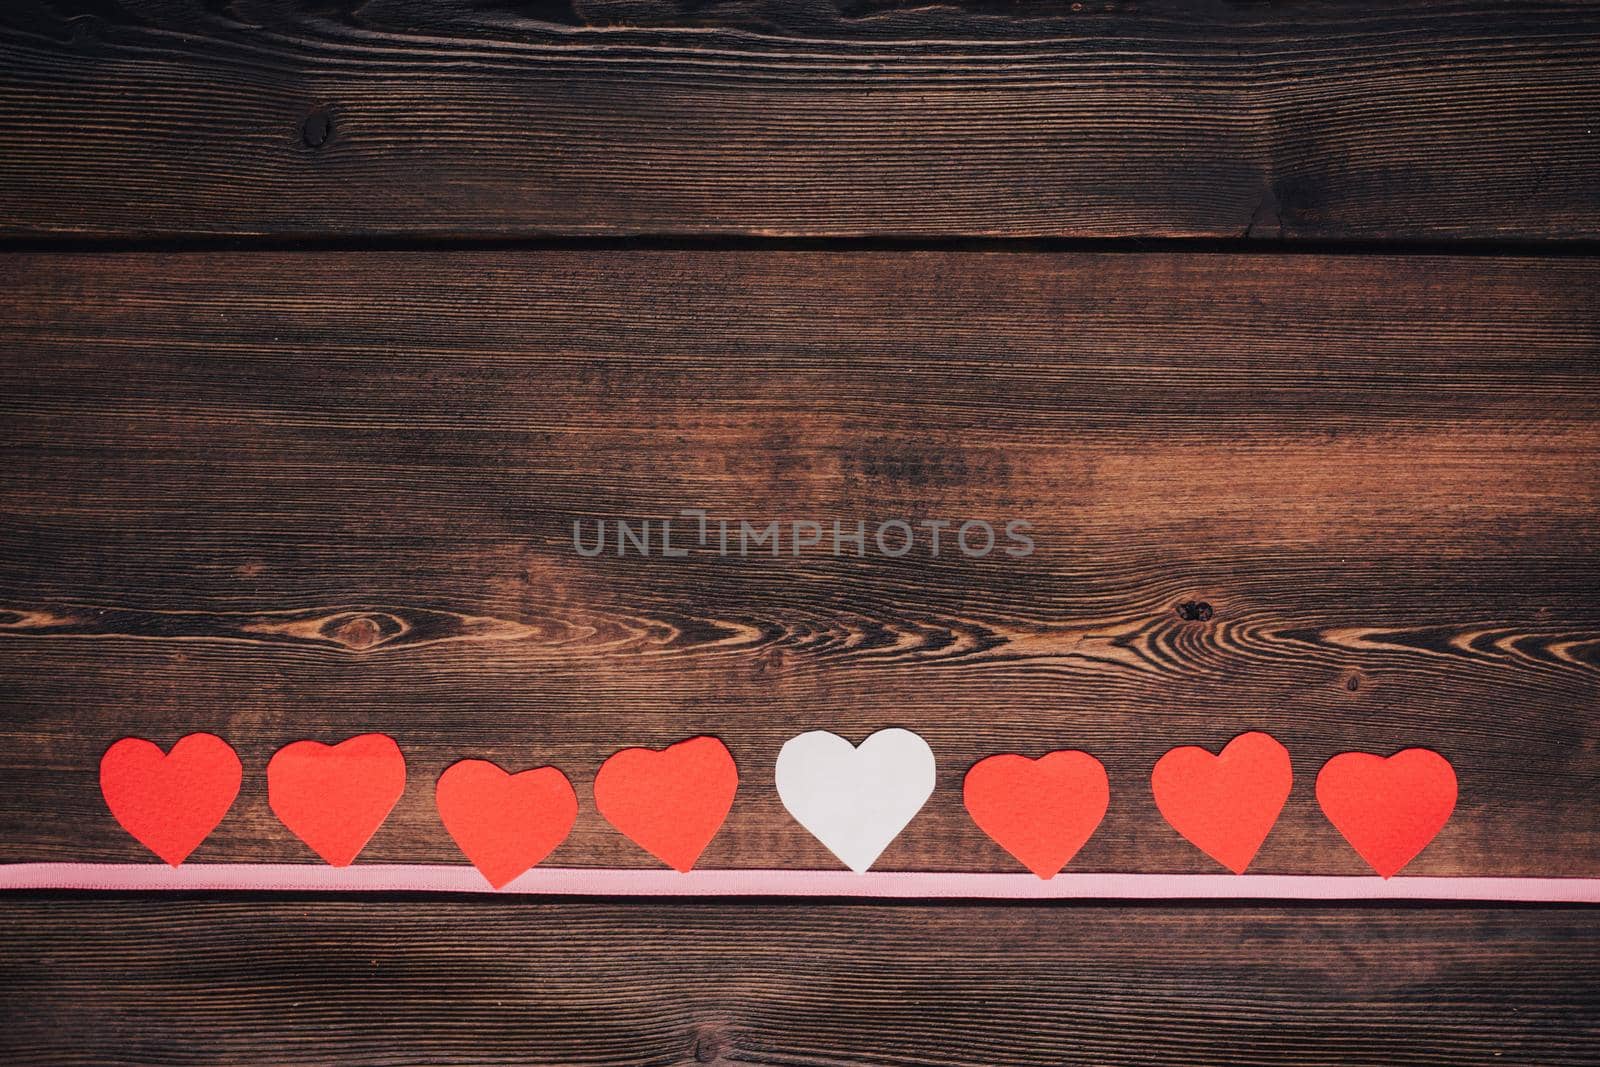 wooden background paper hearts creative decoration object. High quality photo